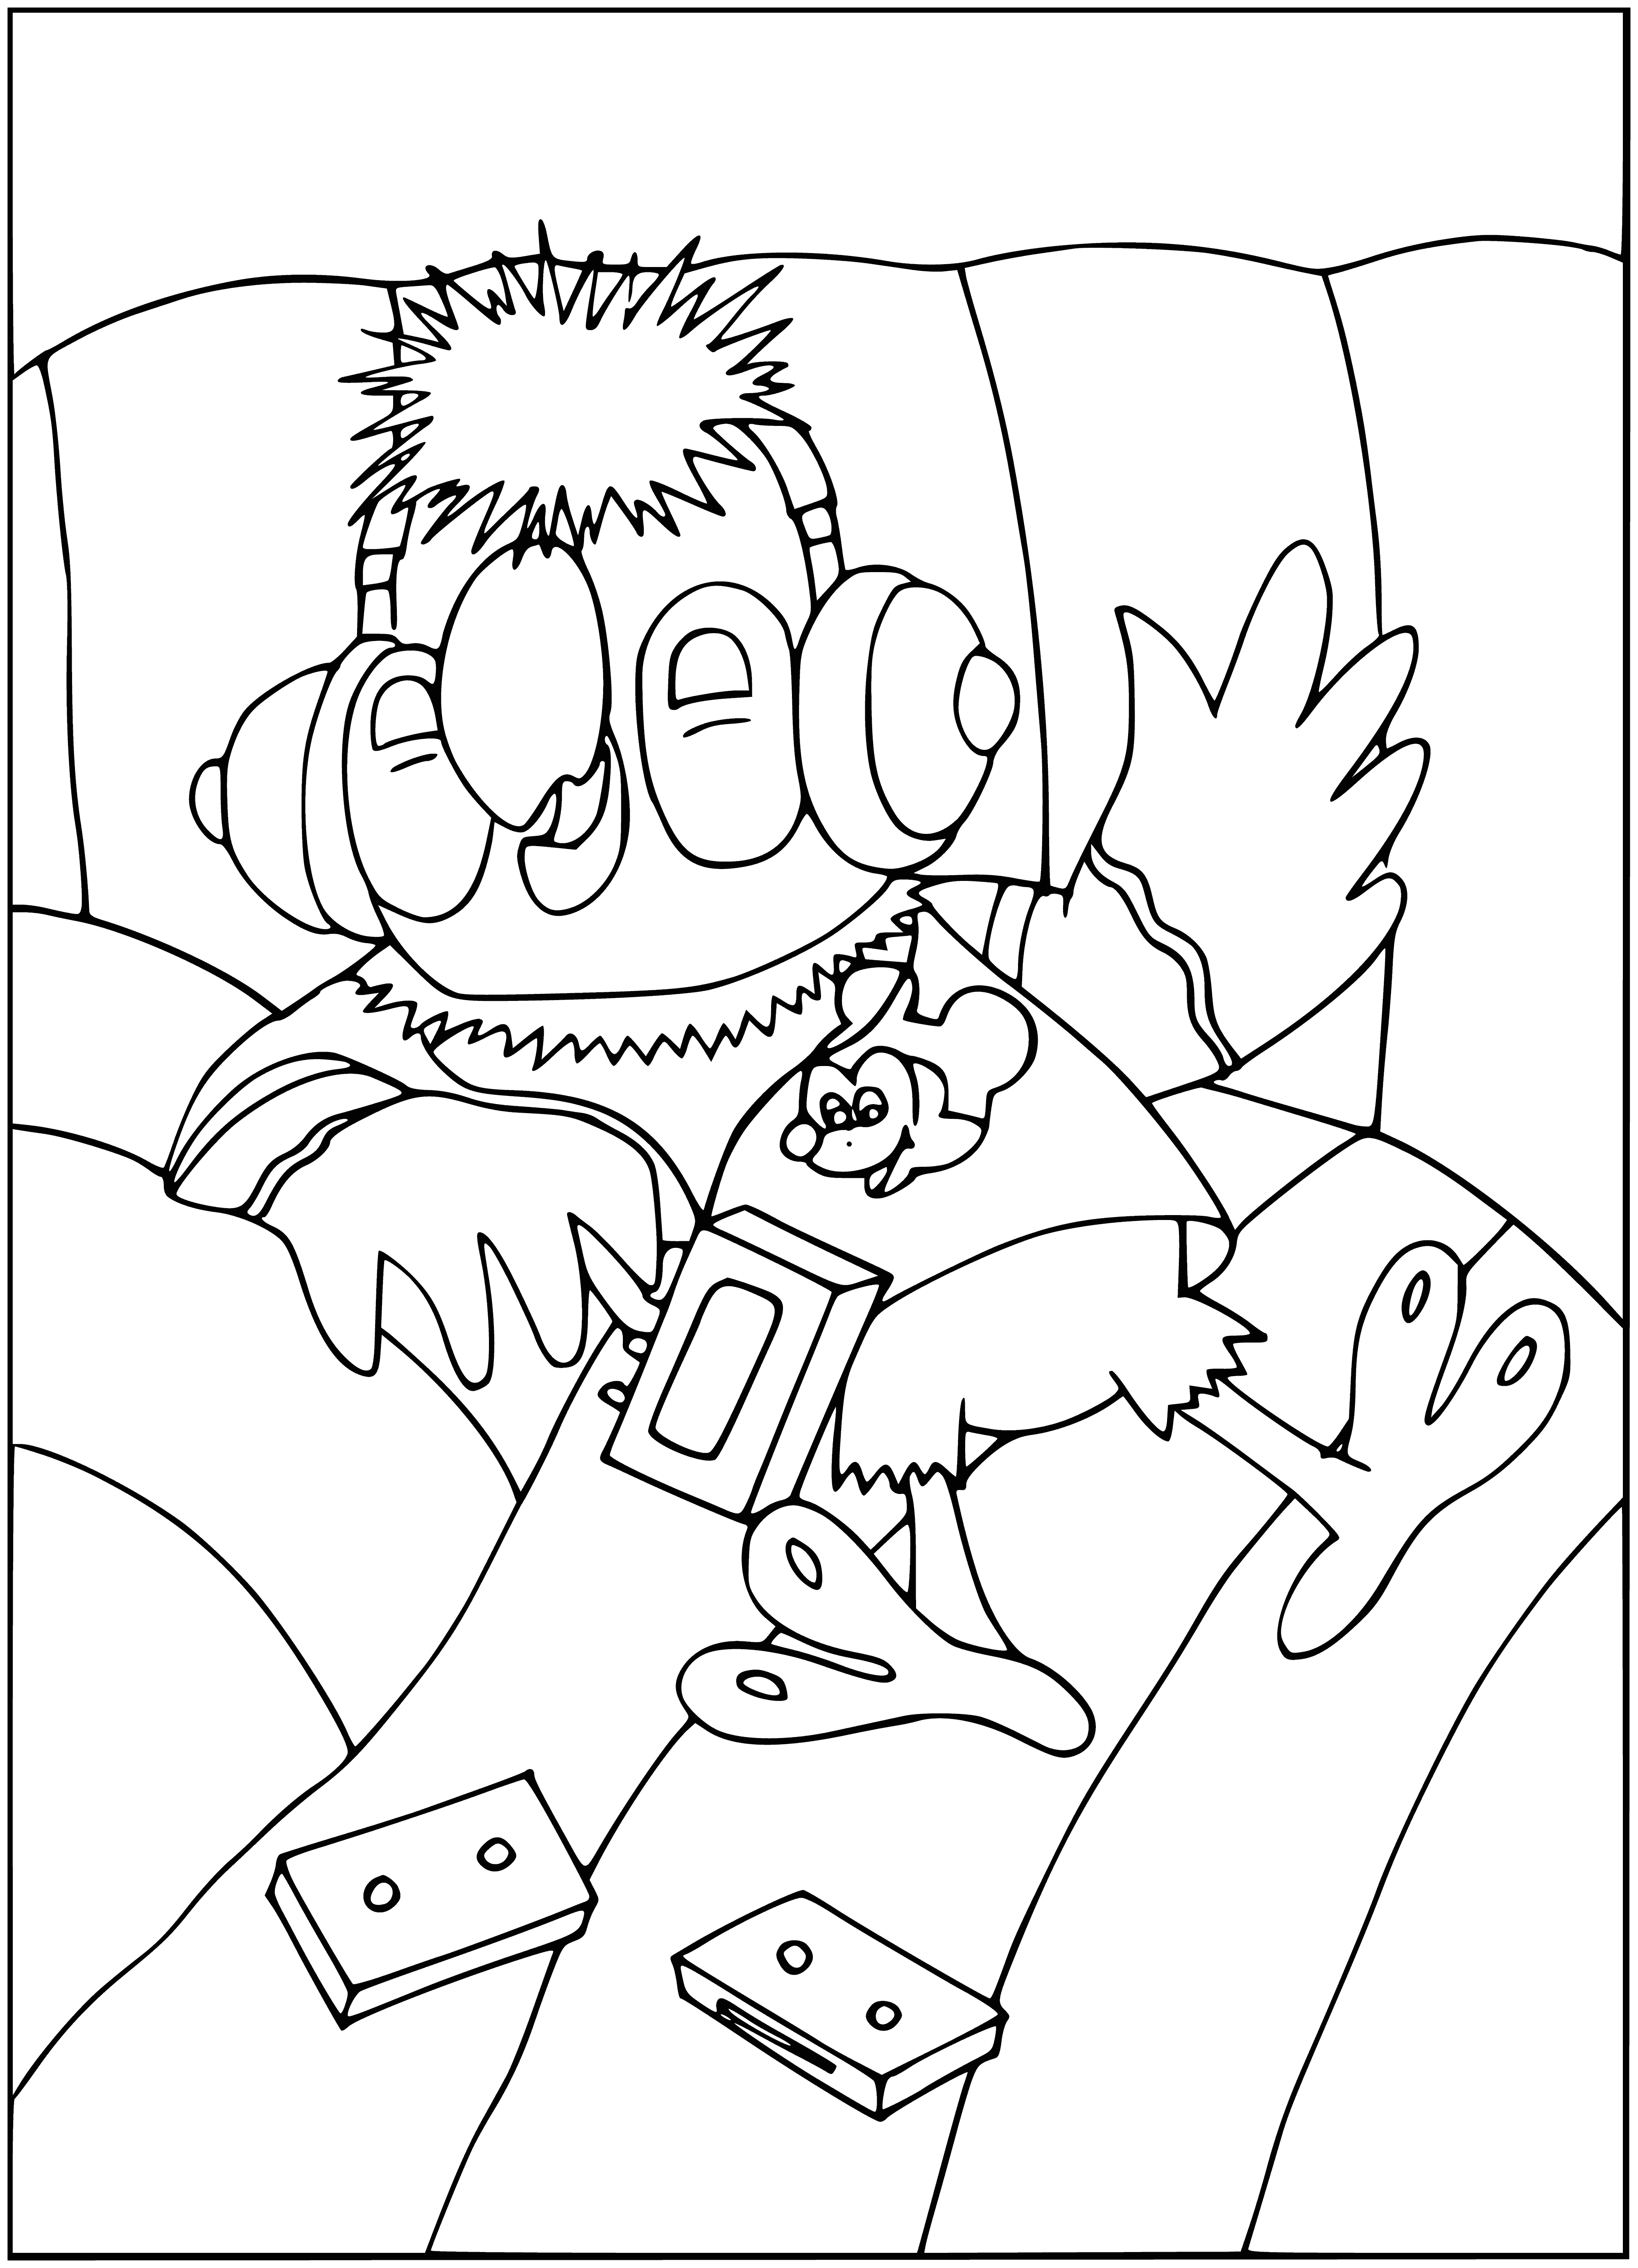 coloring page: A parrot perched with one foot in a toilet in a blue bathroom looks at camera - background has blue shower curtain.